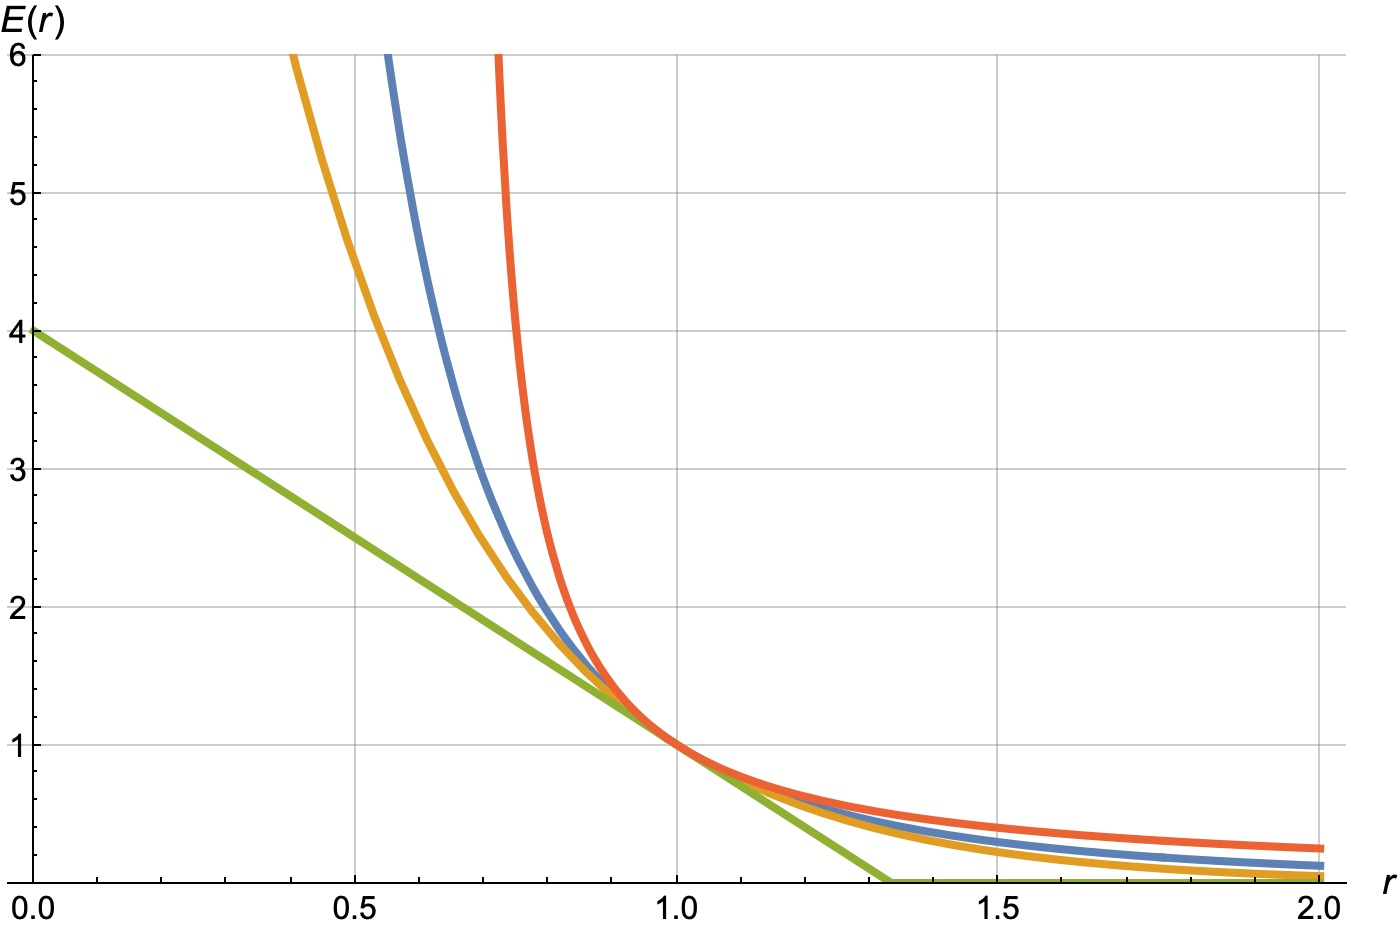 Normalized demand curves with slope=3: green – linear, yellow – exponential, navy blue – power, red – hyperbolic.